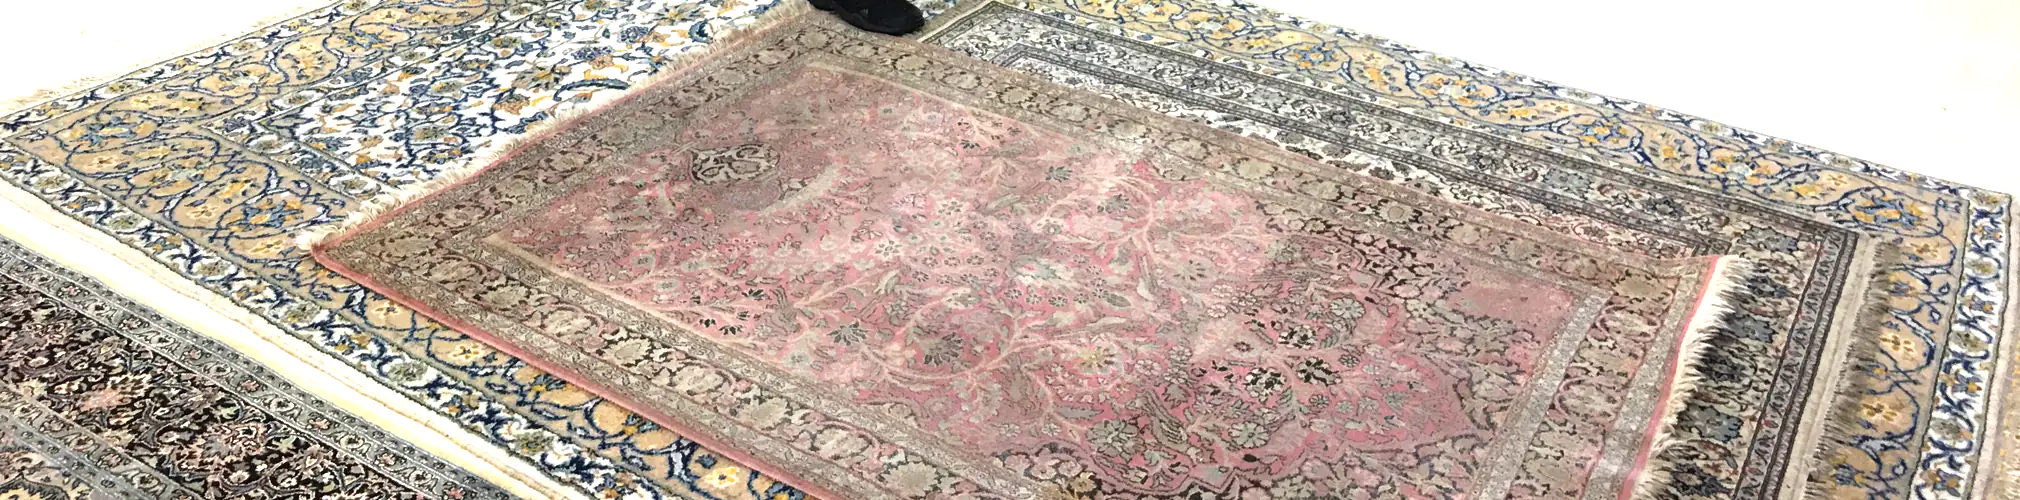 Oriental Rug Cleaning Services Palm Beach